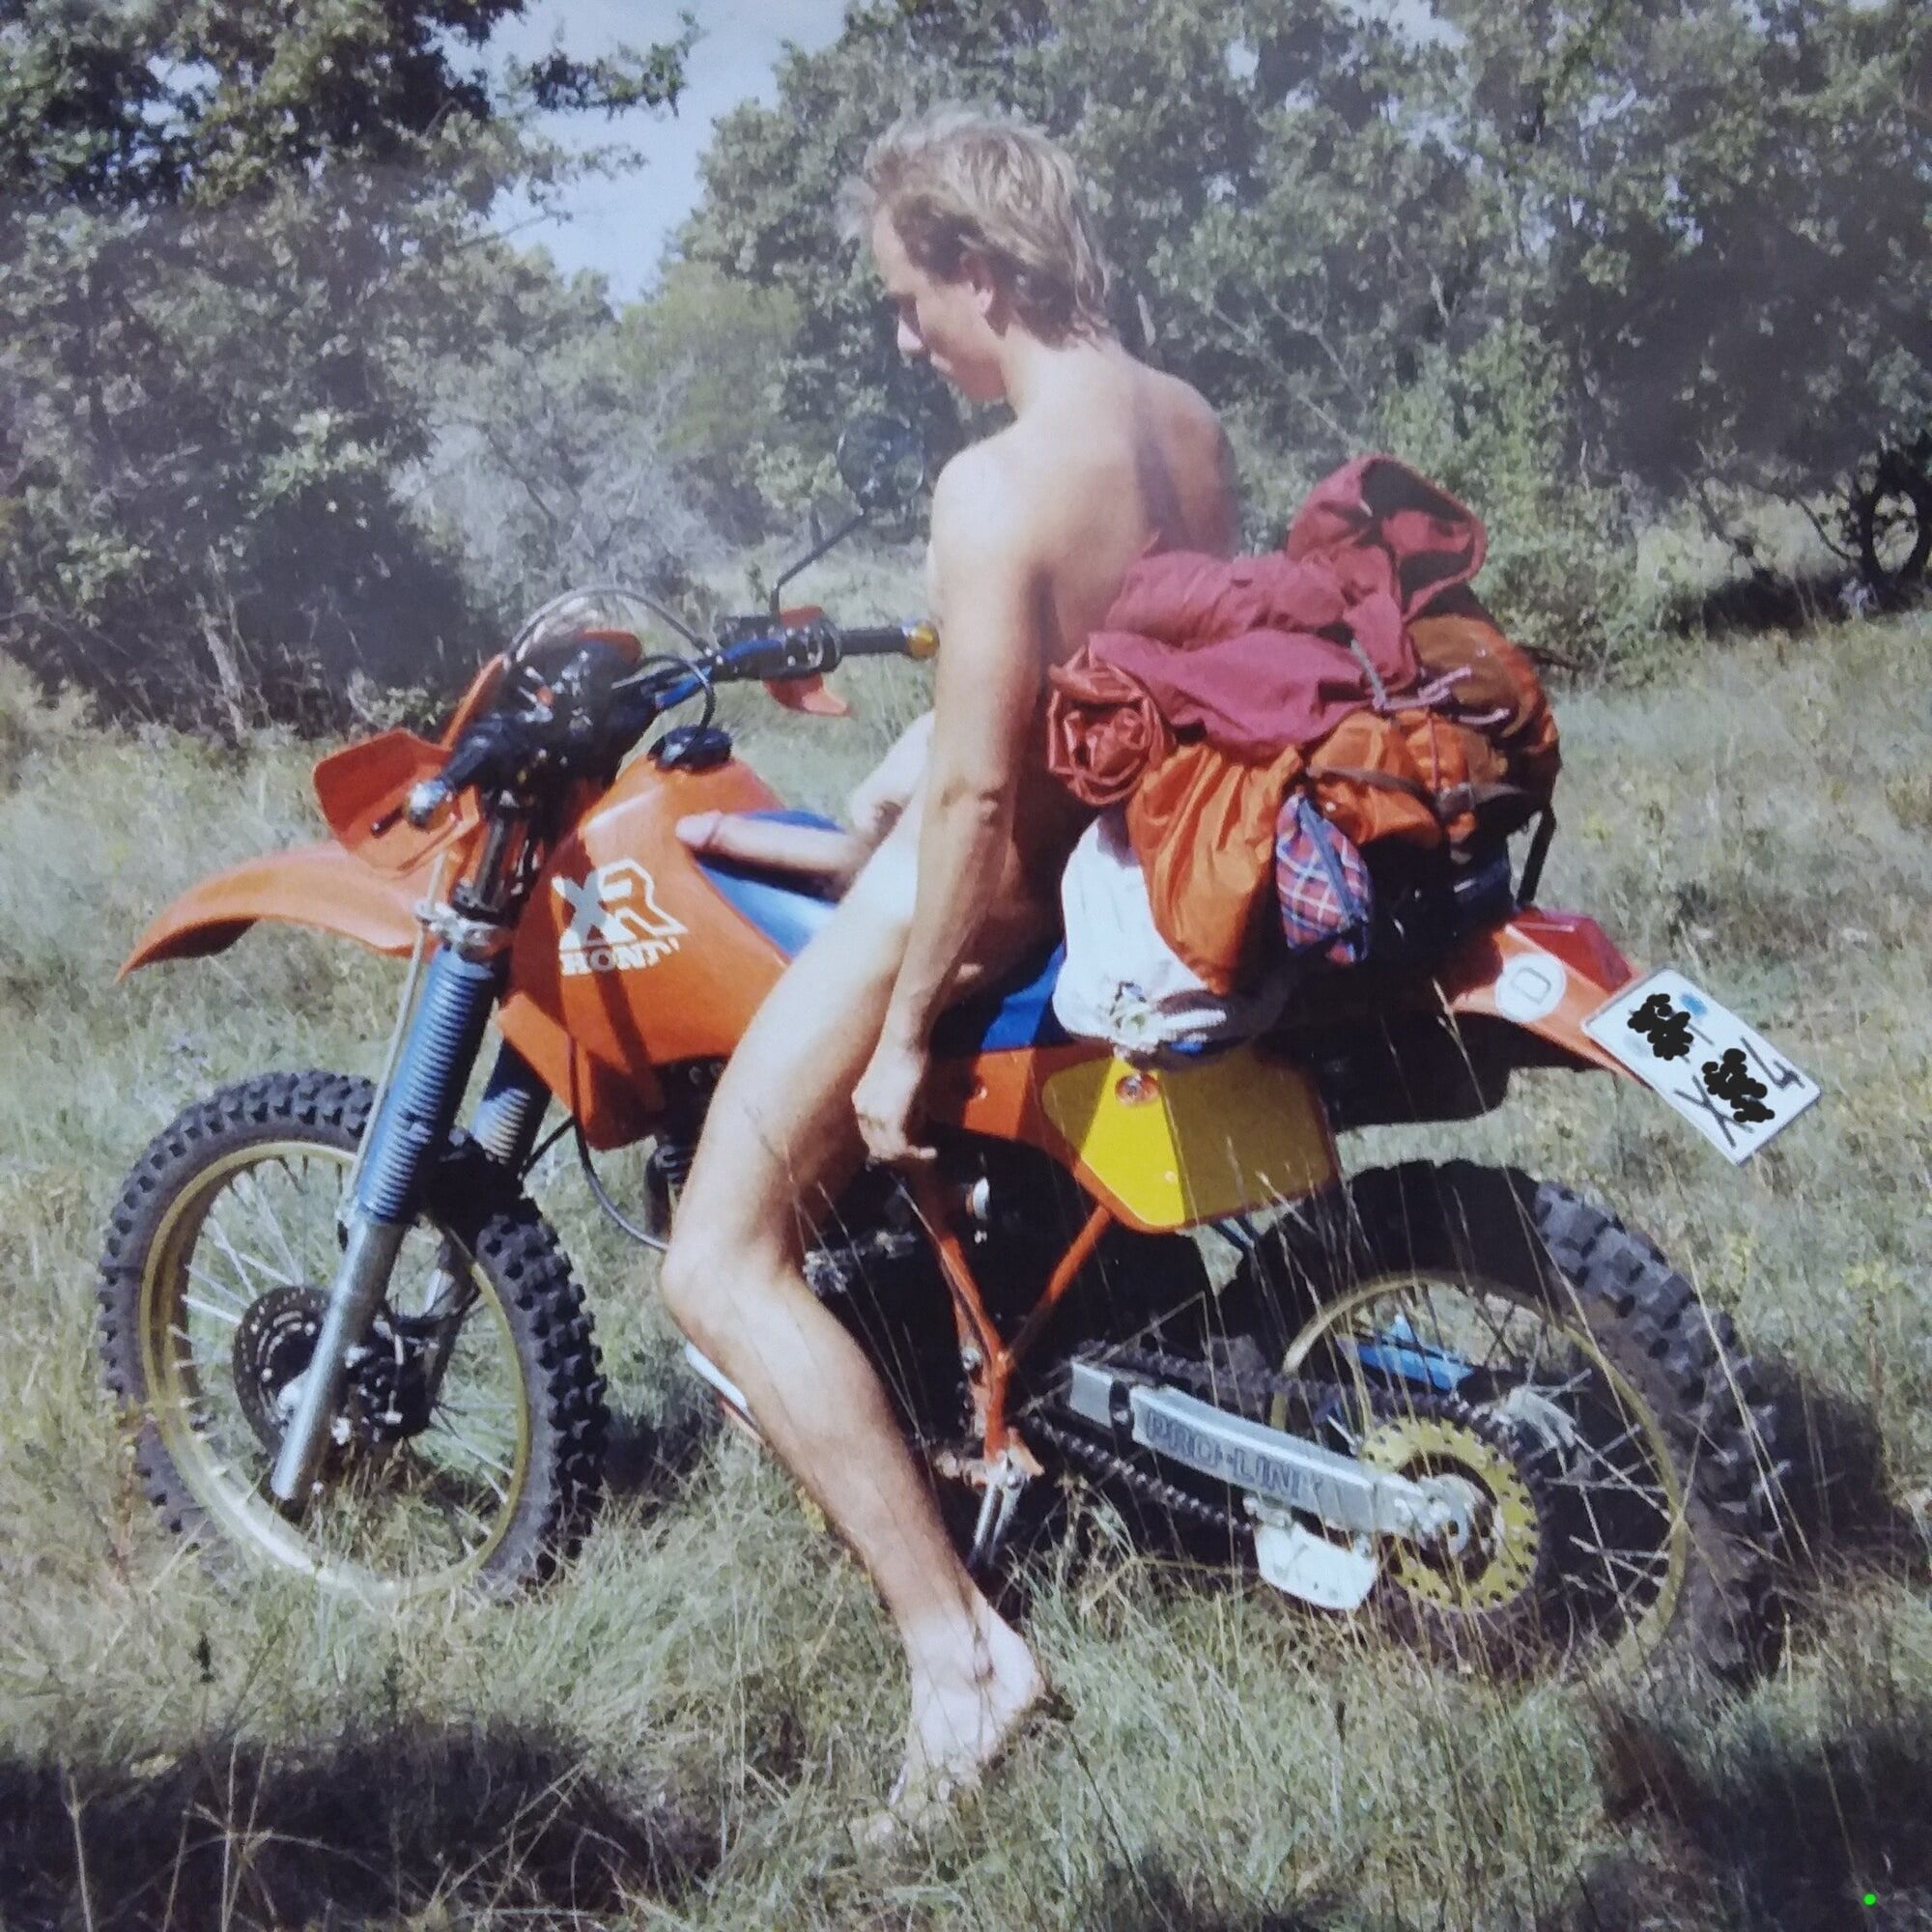 Bike Holiday. unusual remembering Pic! sweet 19 then!